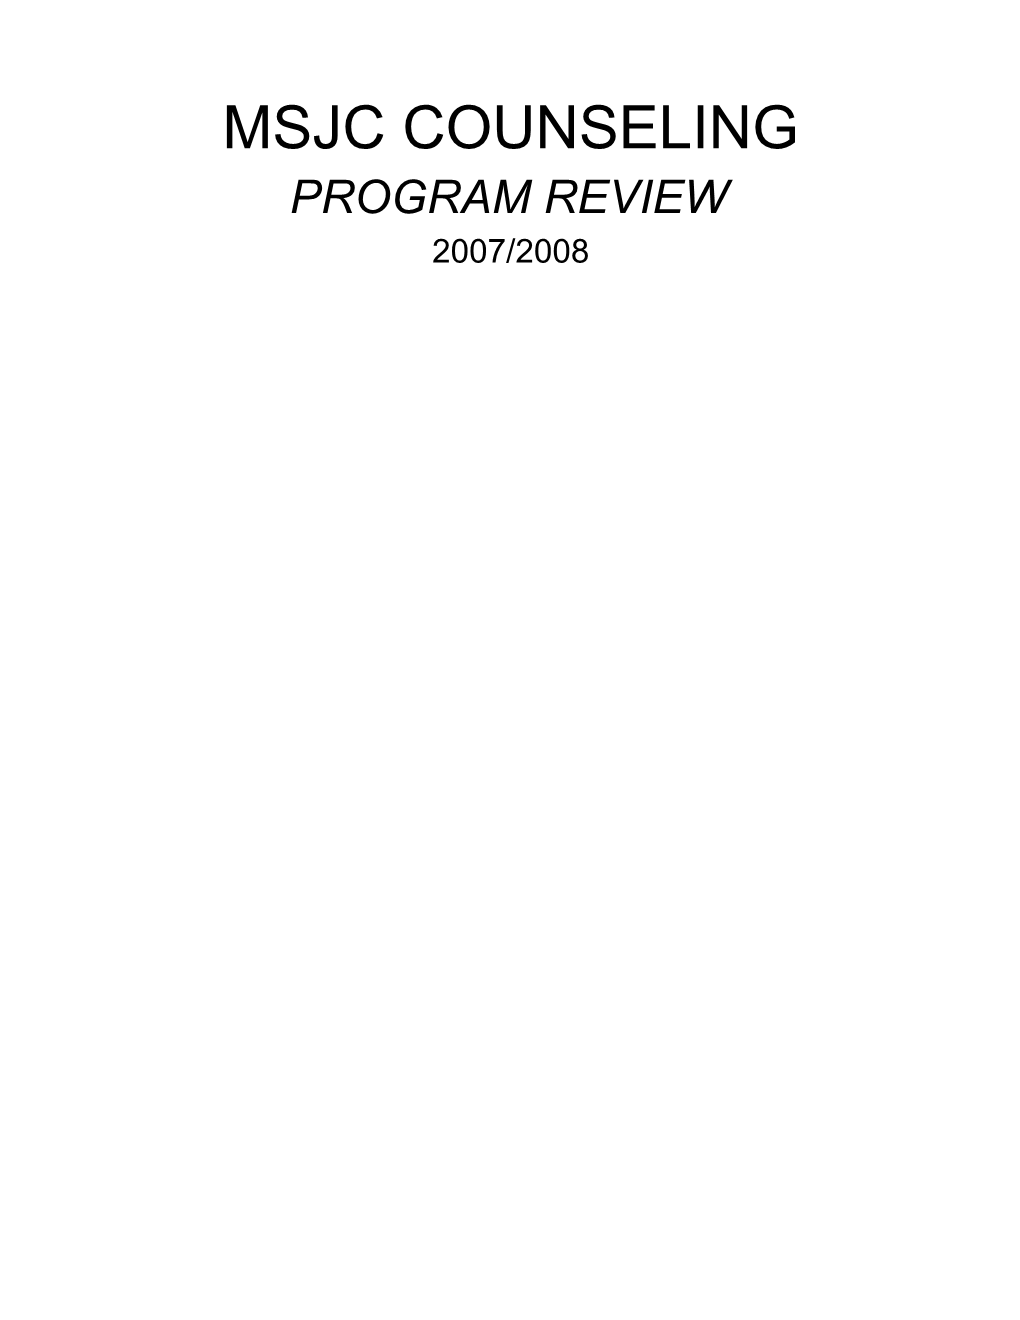 226. Counseling Program Review 2007-2008